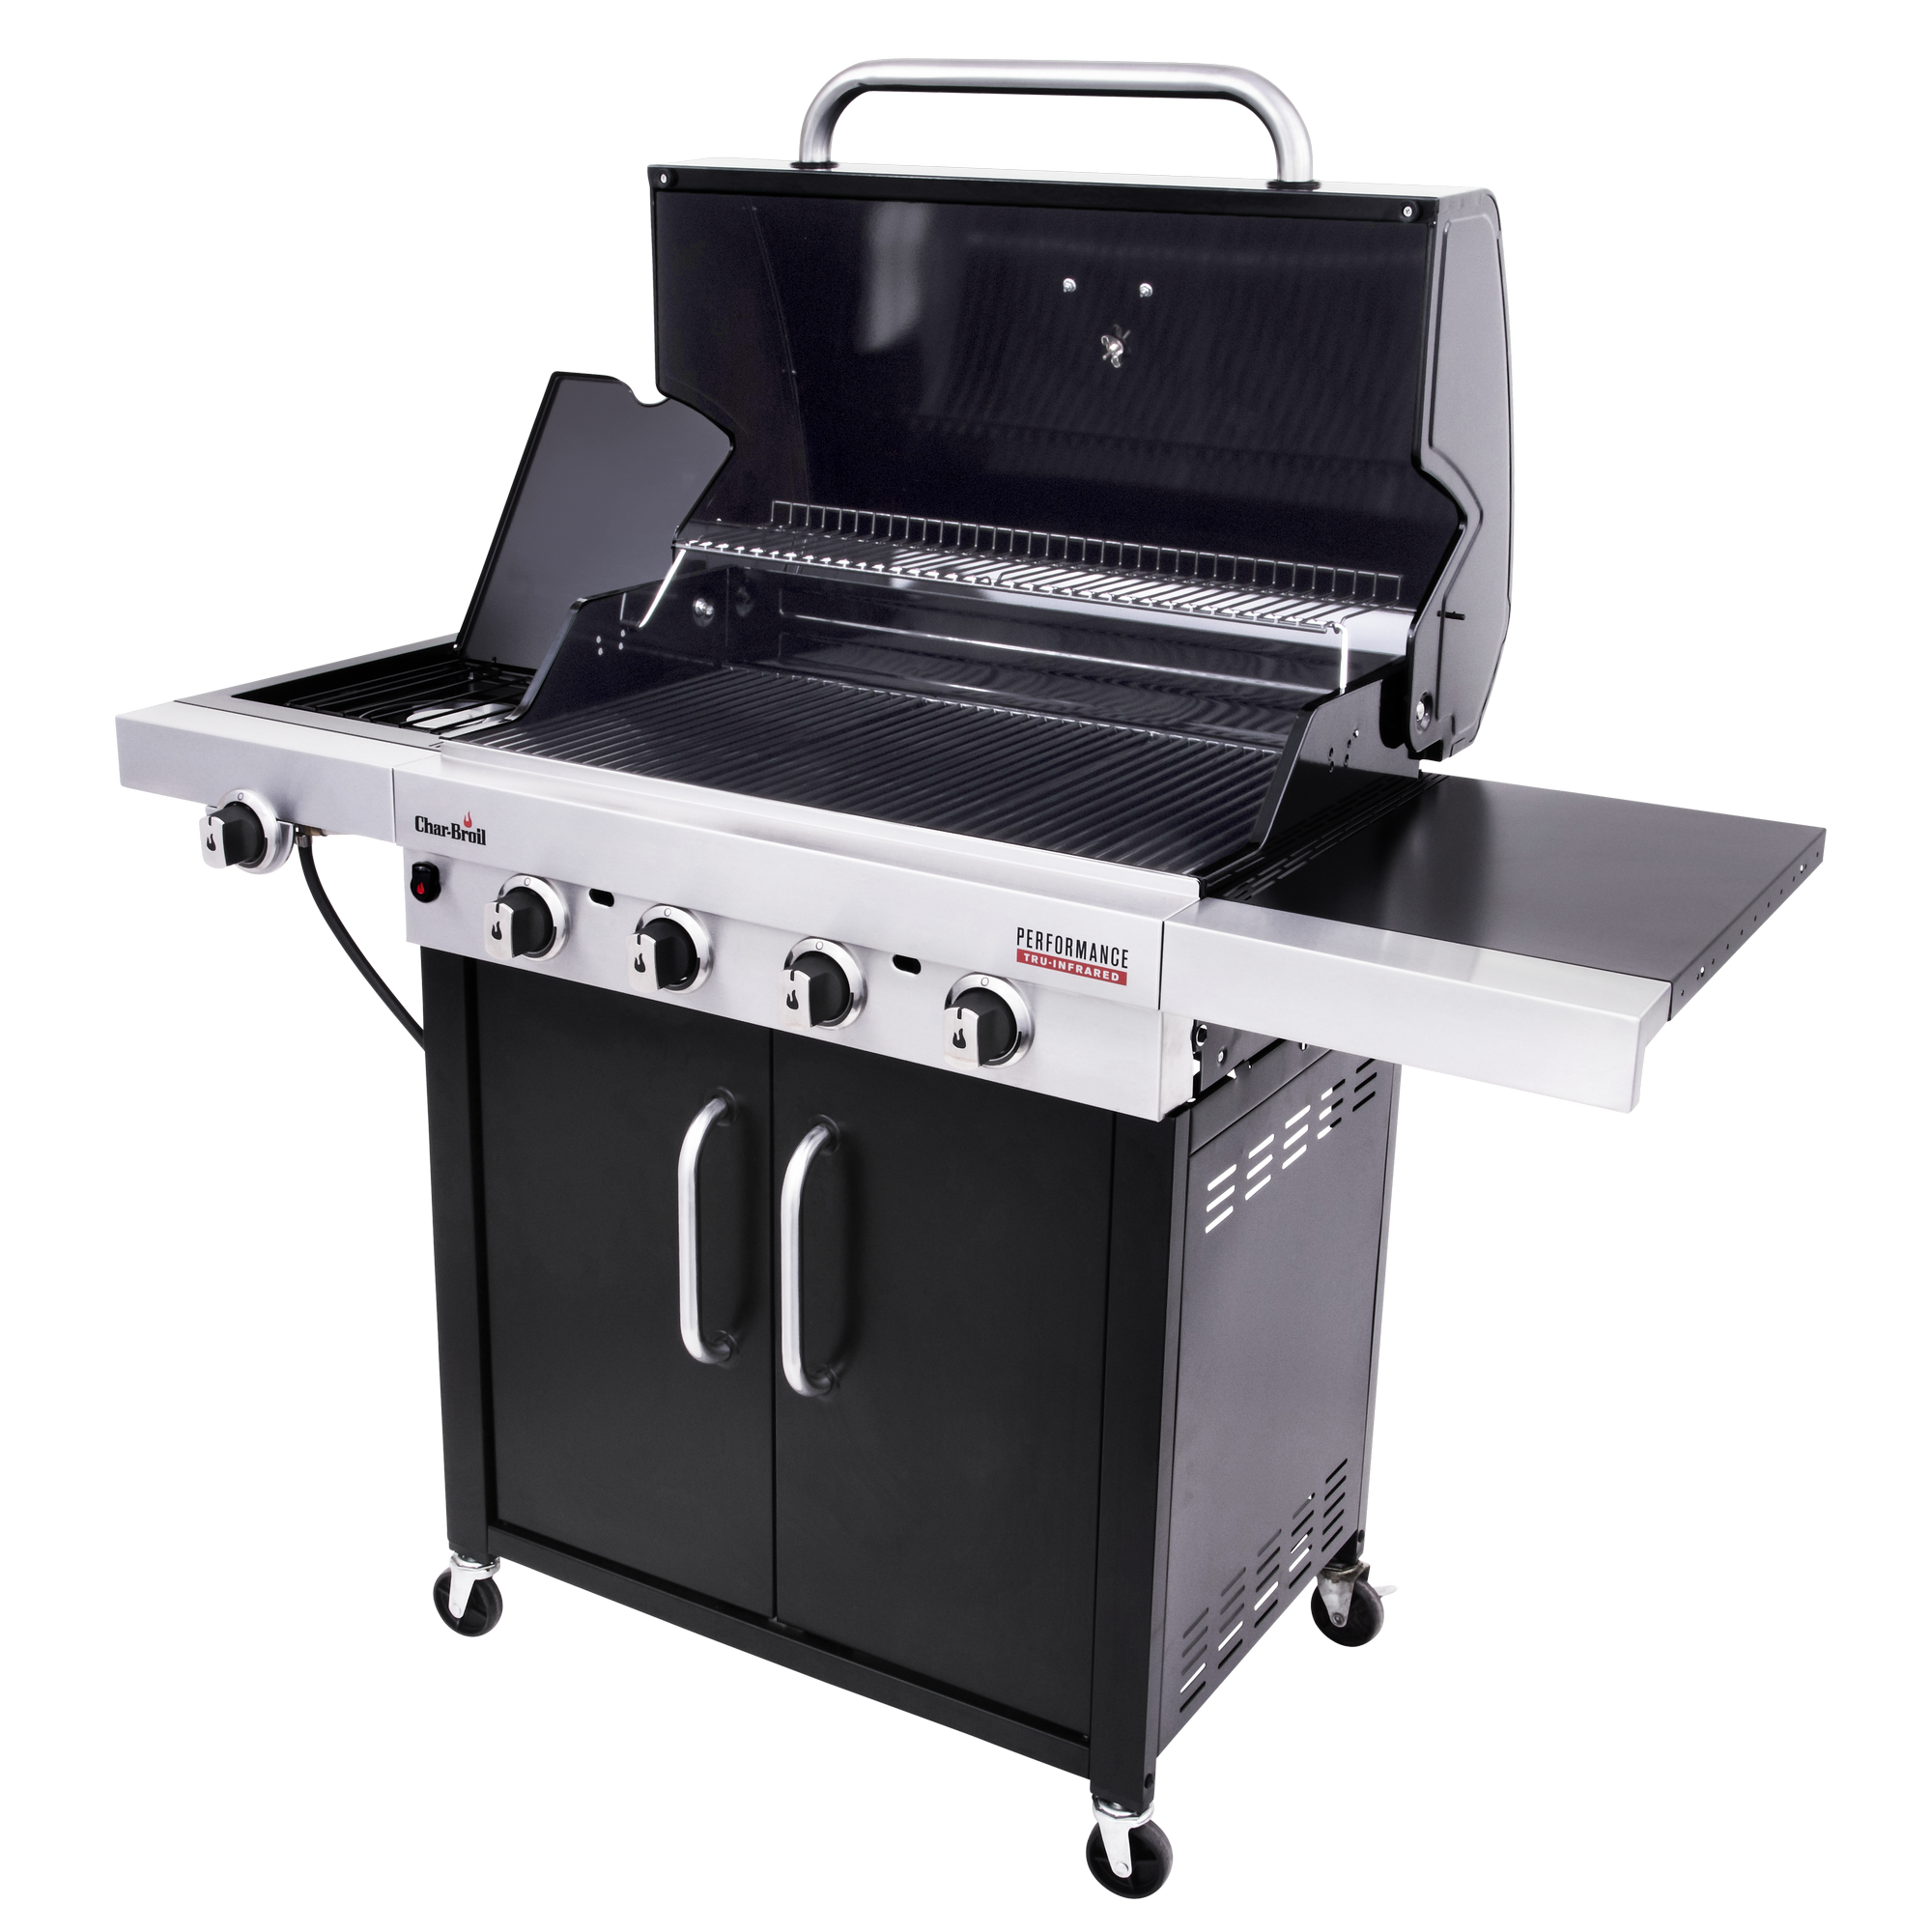 Gasgrill 'Performance 440 B' schwarz 10,5 kW + product picture